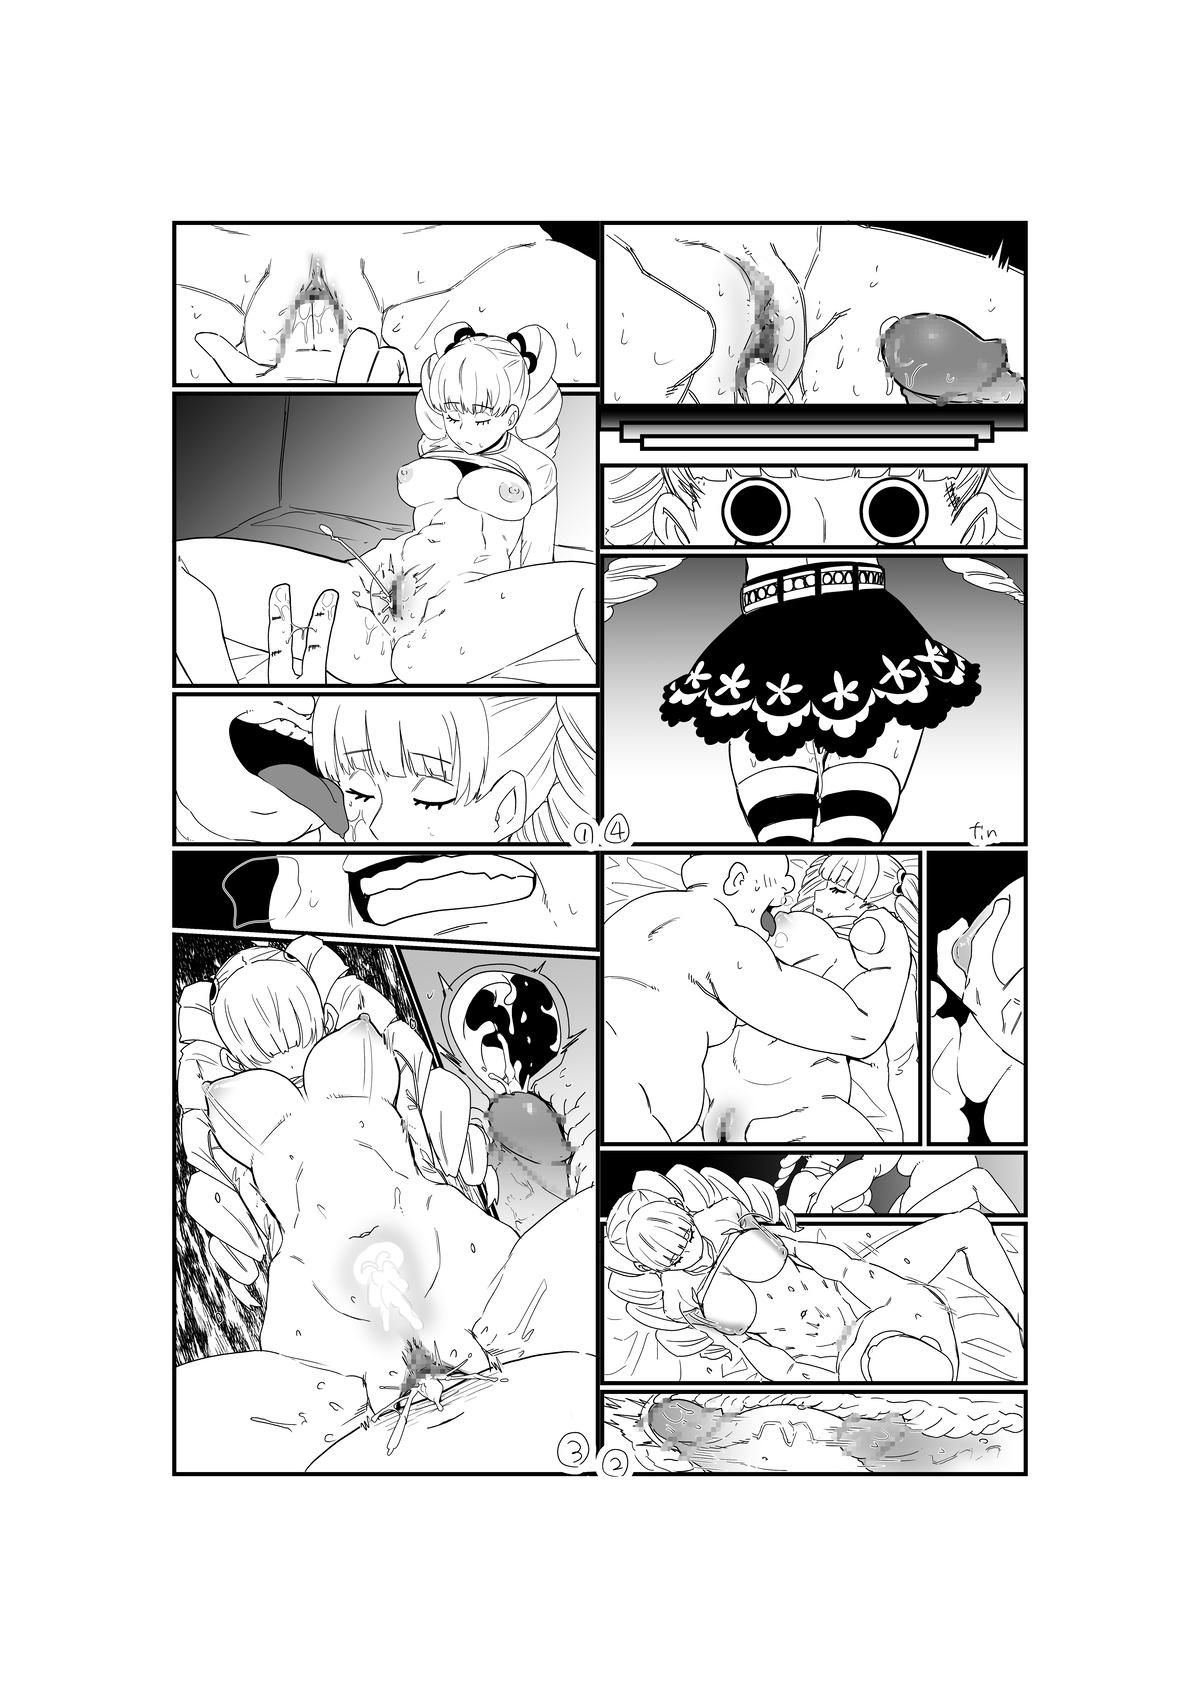 A Silent Manga About Unconscious Perona Getting Creampied 4